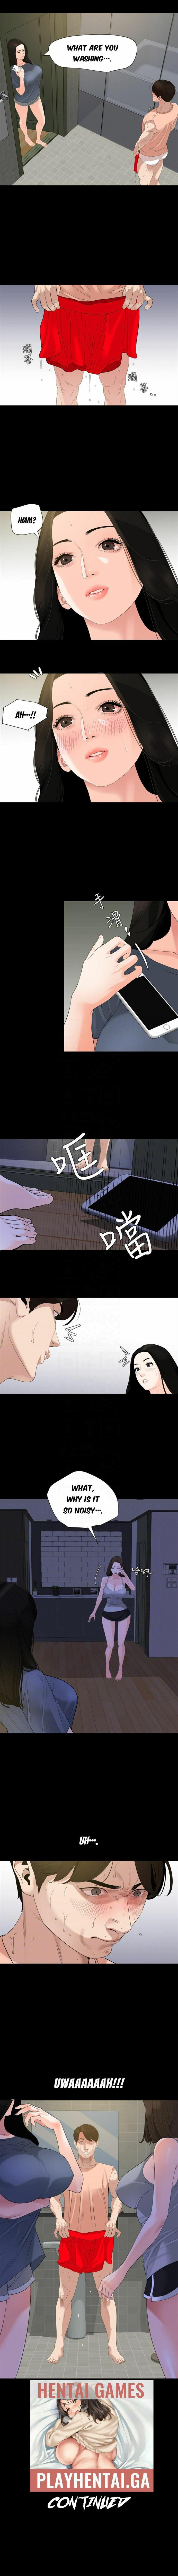 Don’t Be Like This! Son-In-Law 6 [English] 5